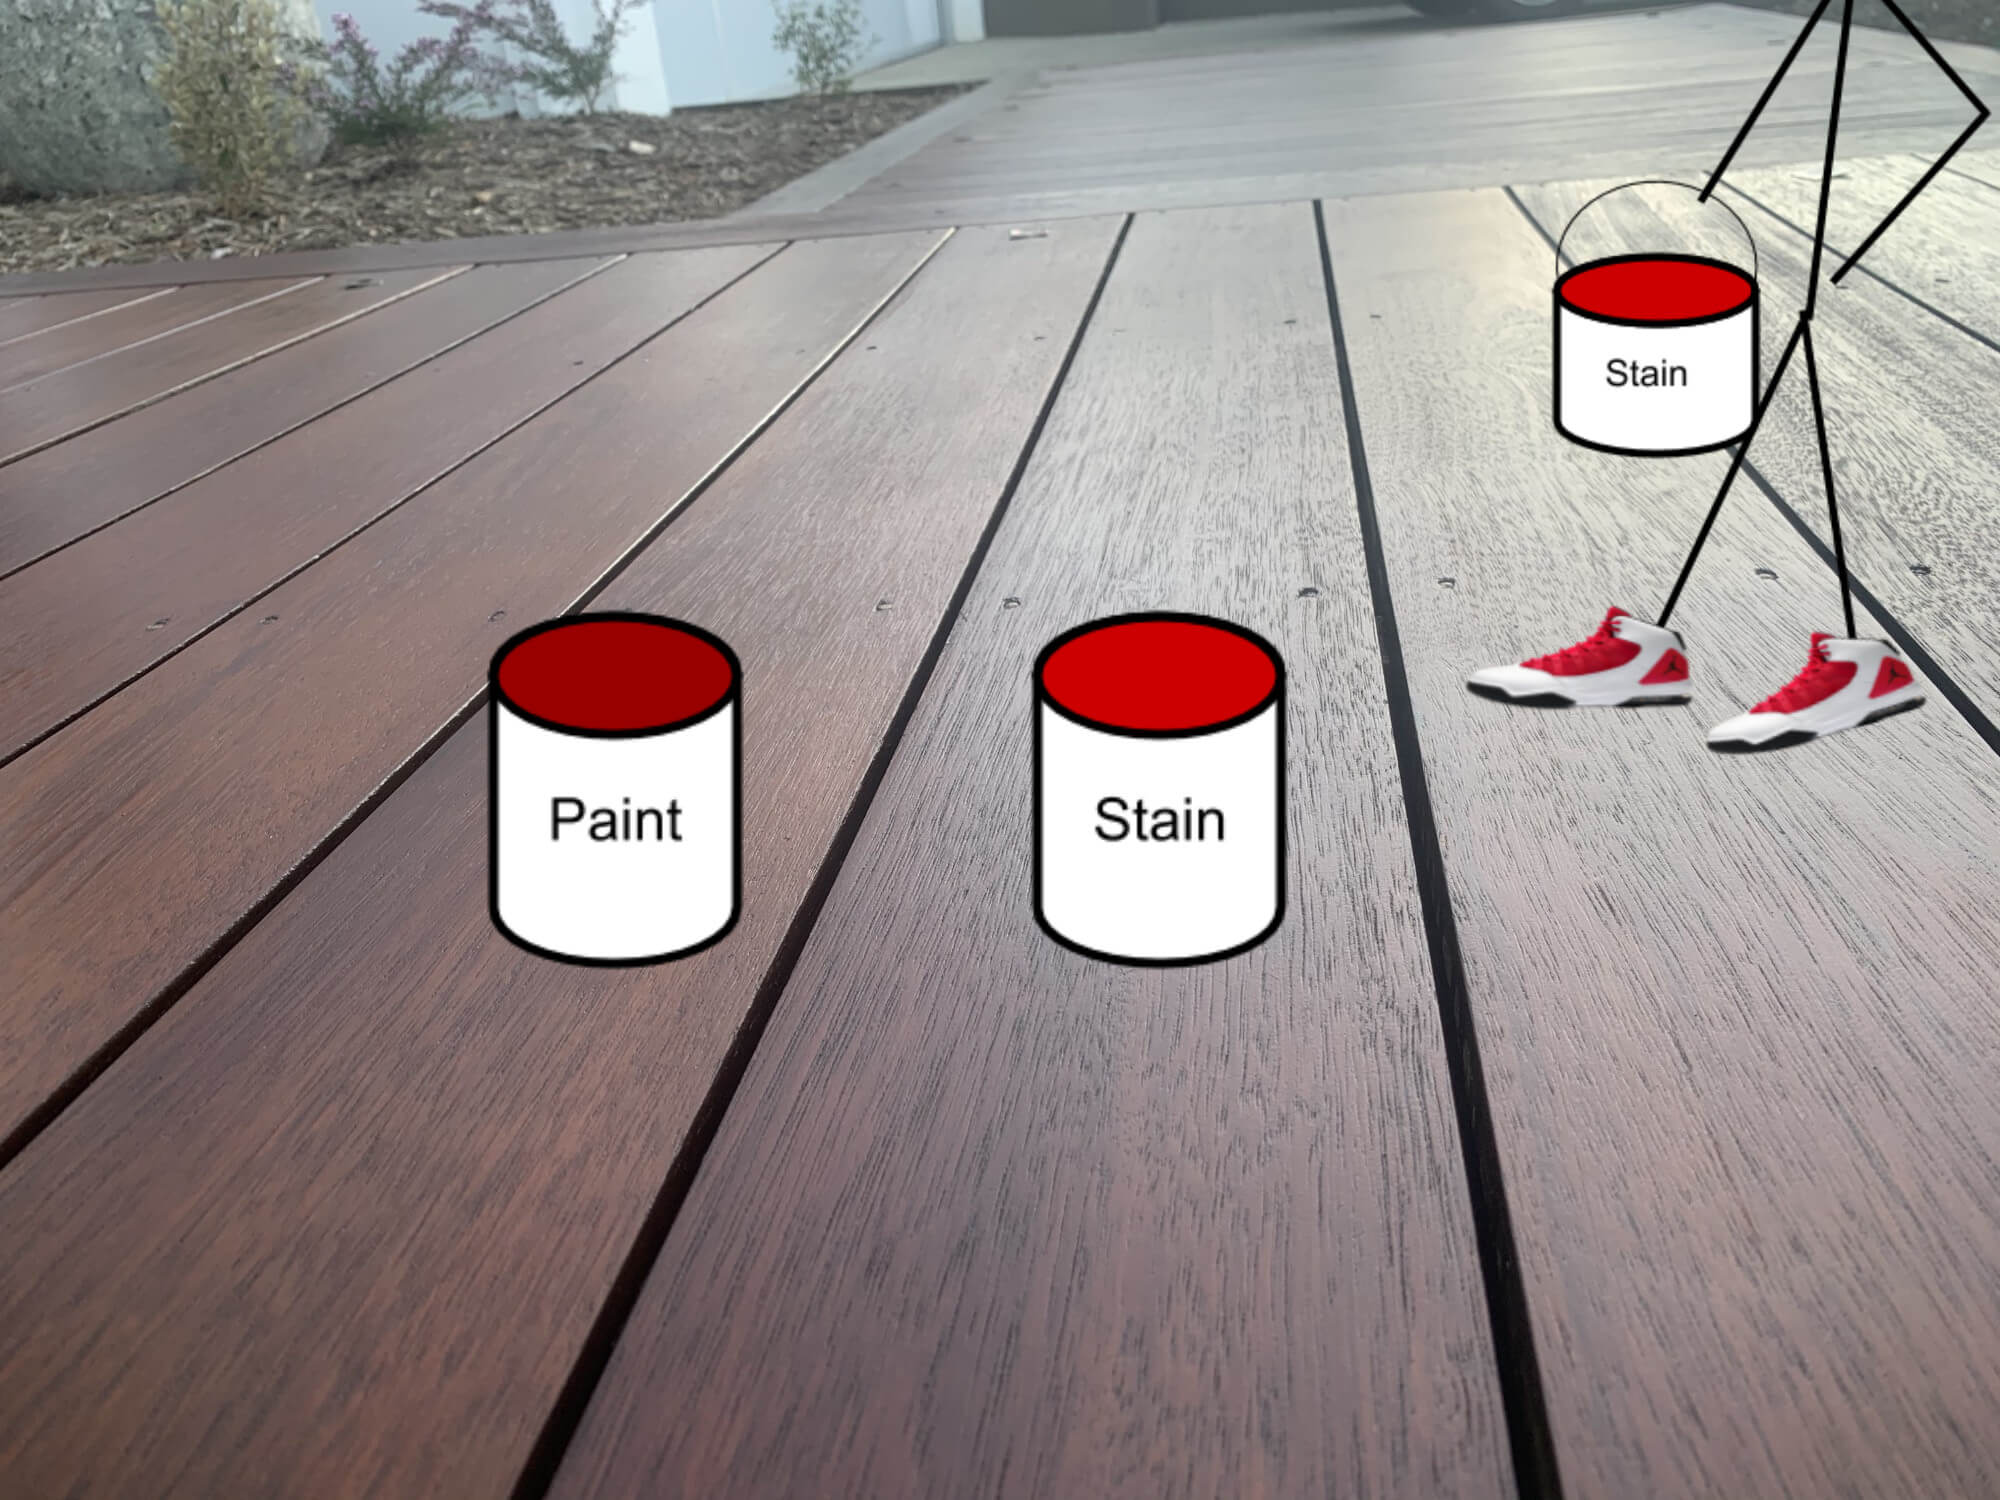 Is it better to paint or stain a deck